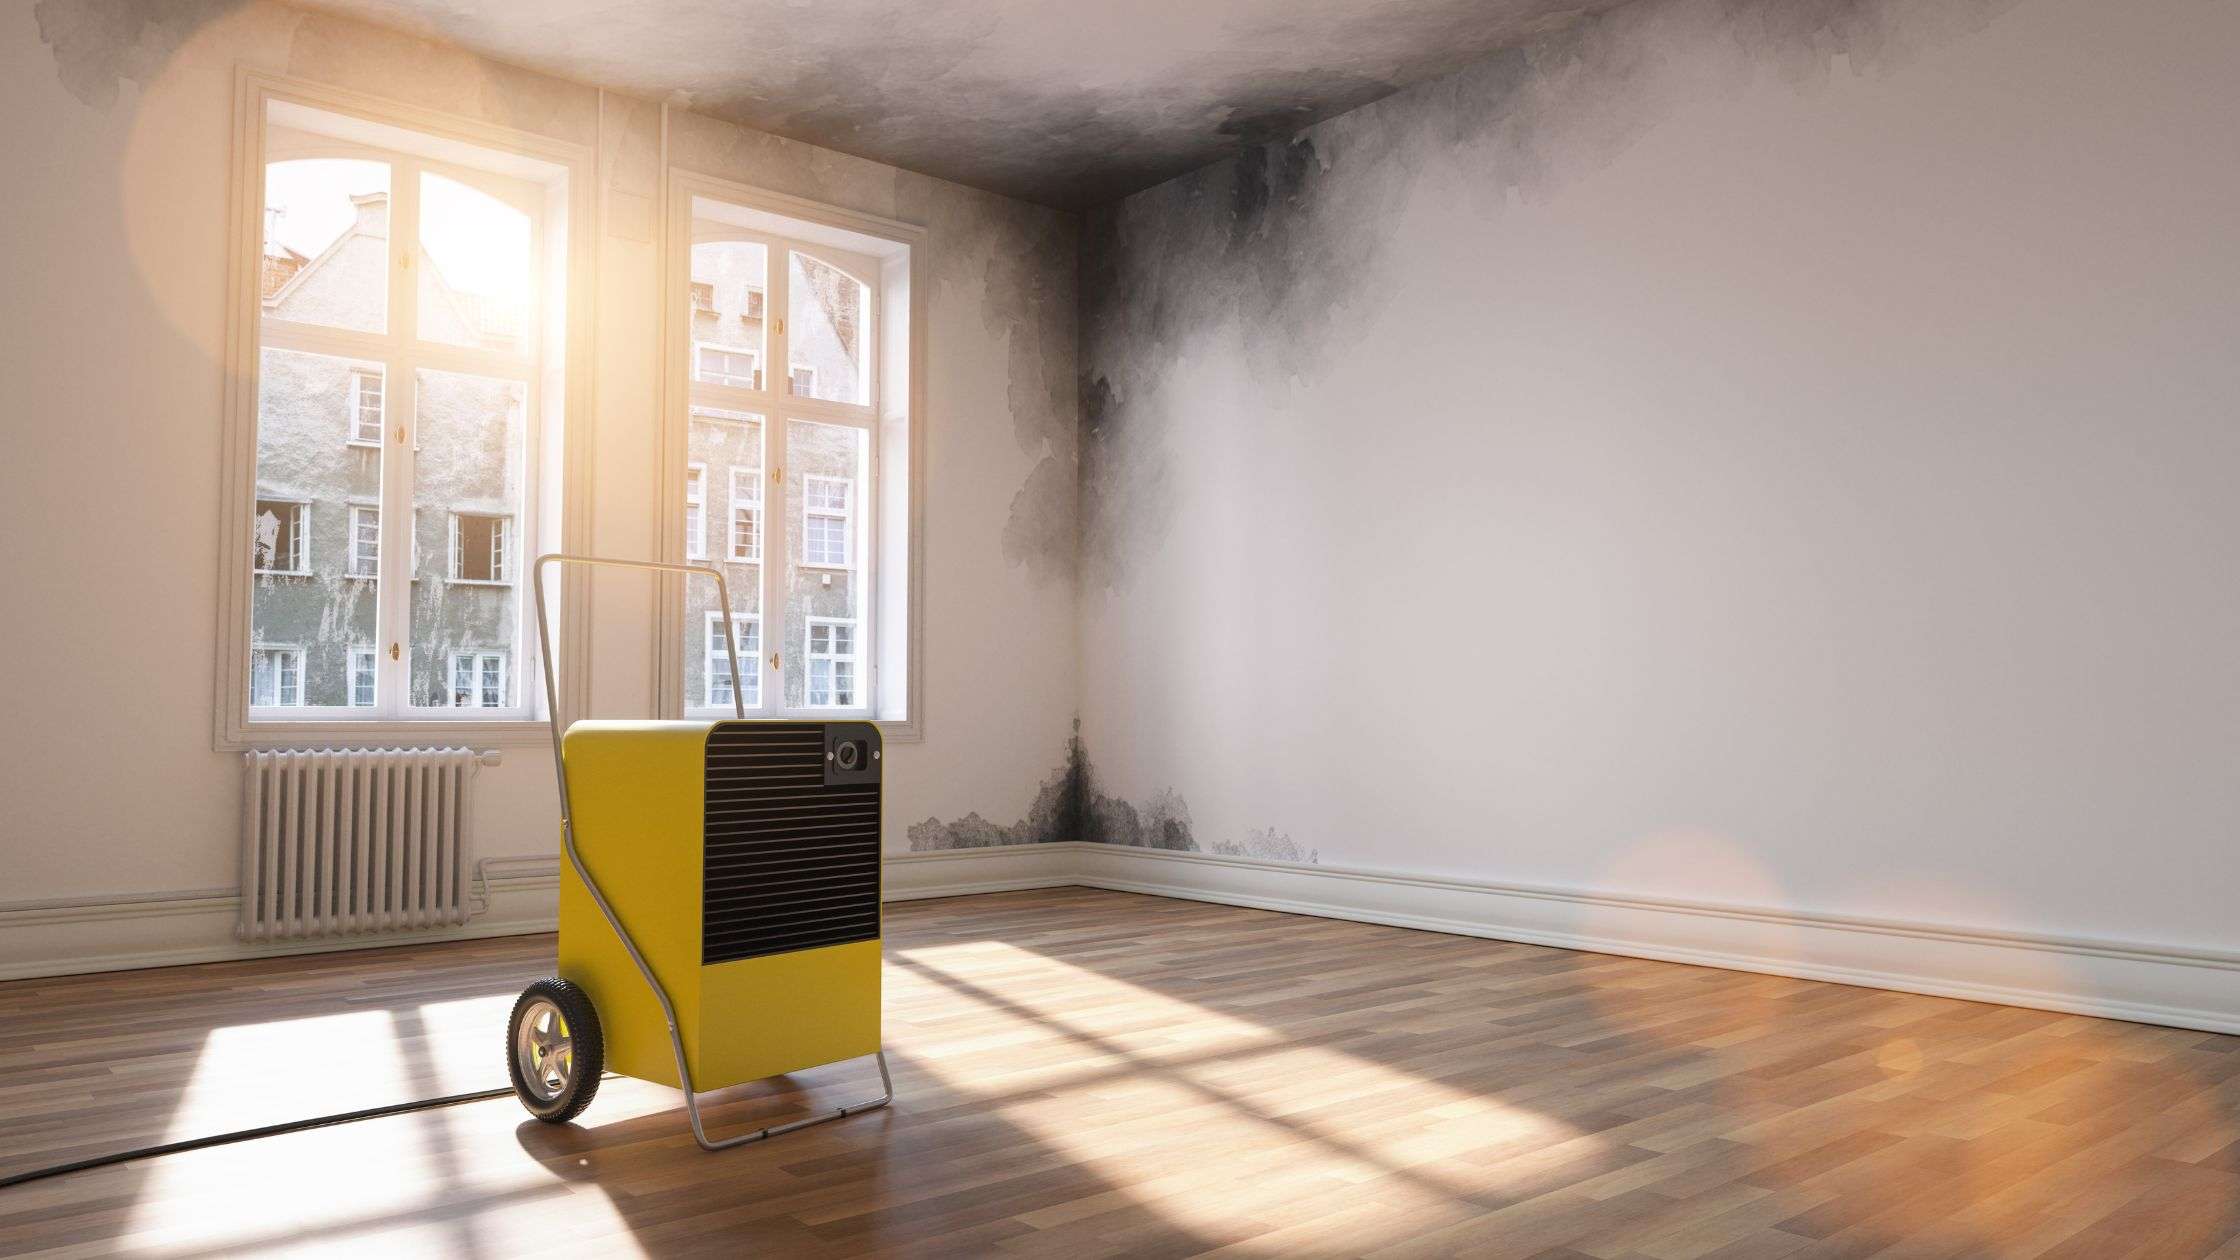 Dehumidifier Disposal for the Conscientious Mind